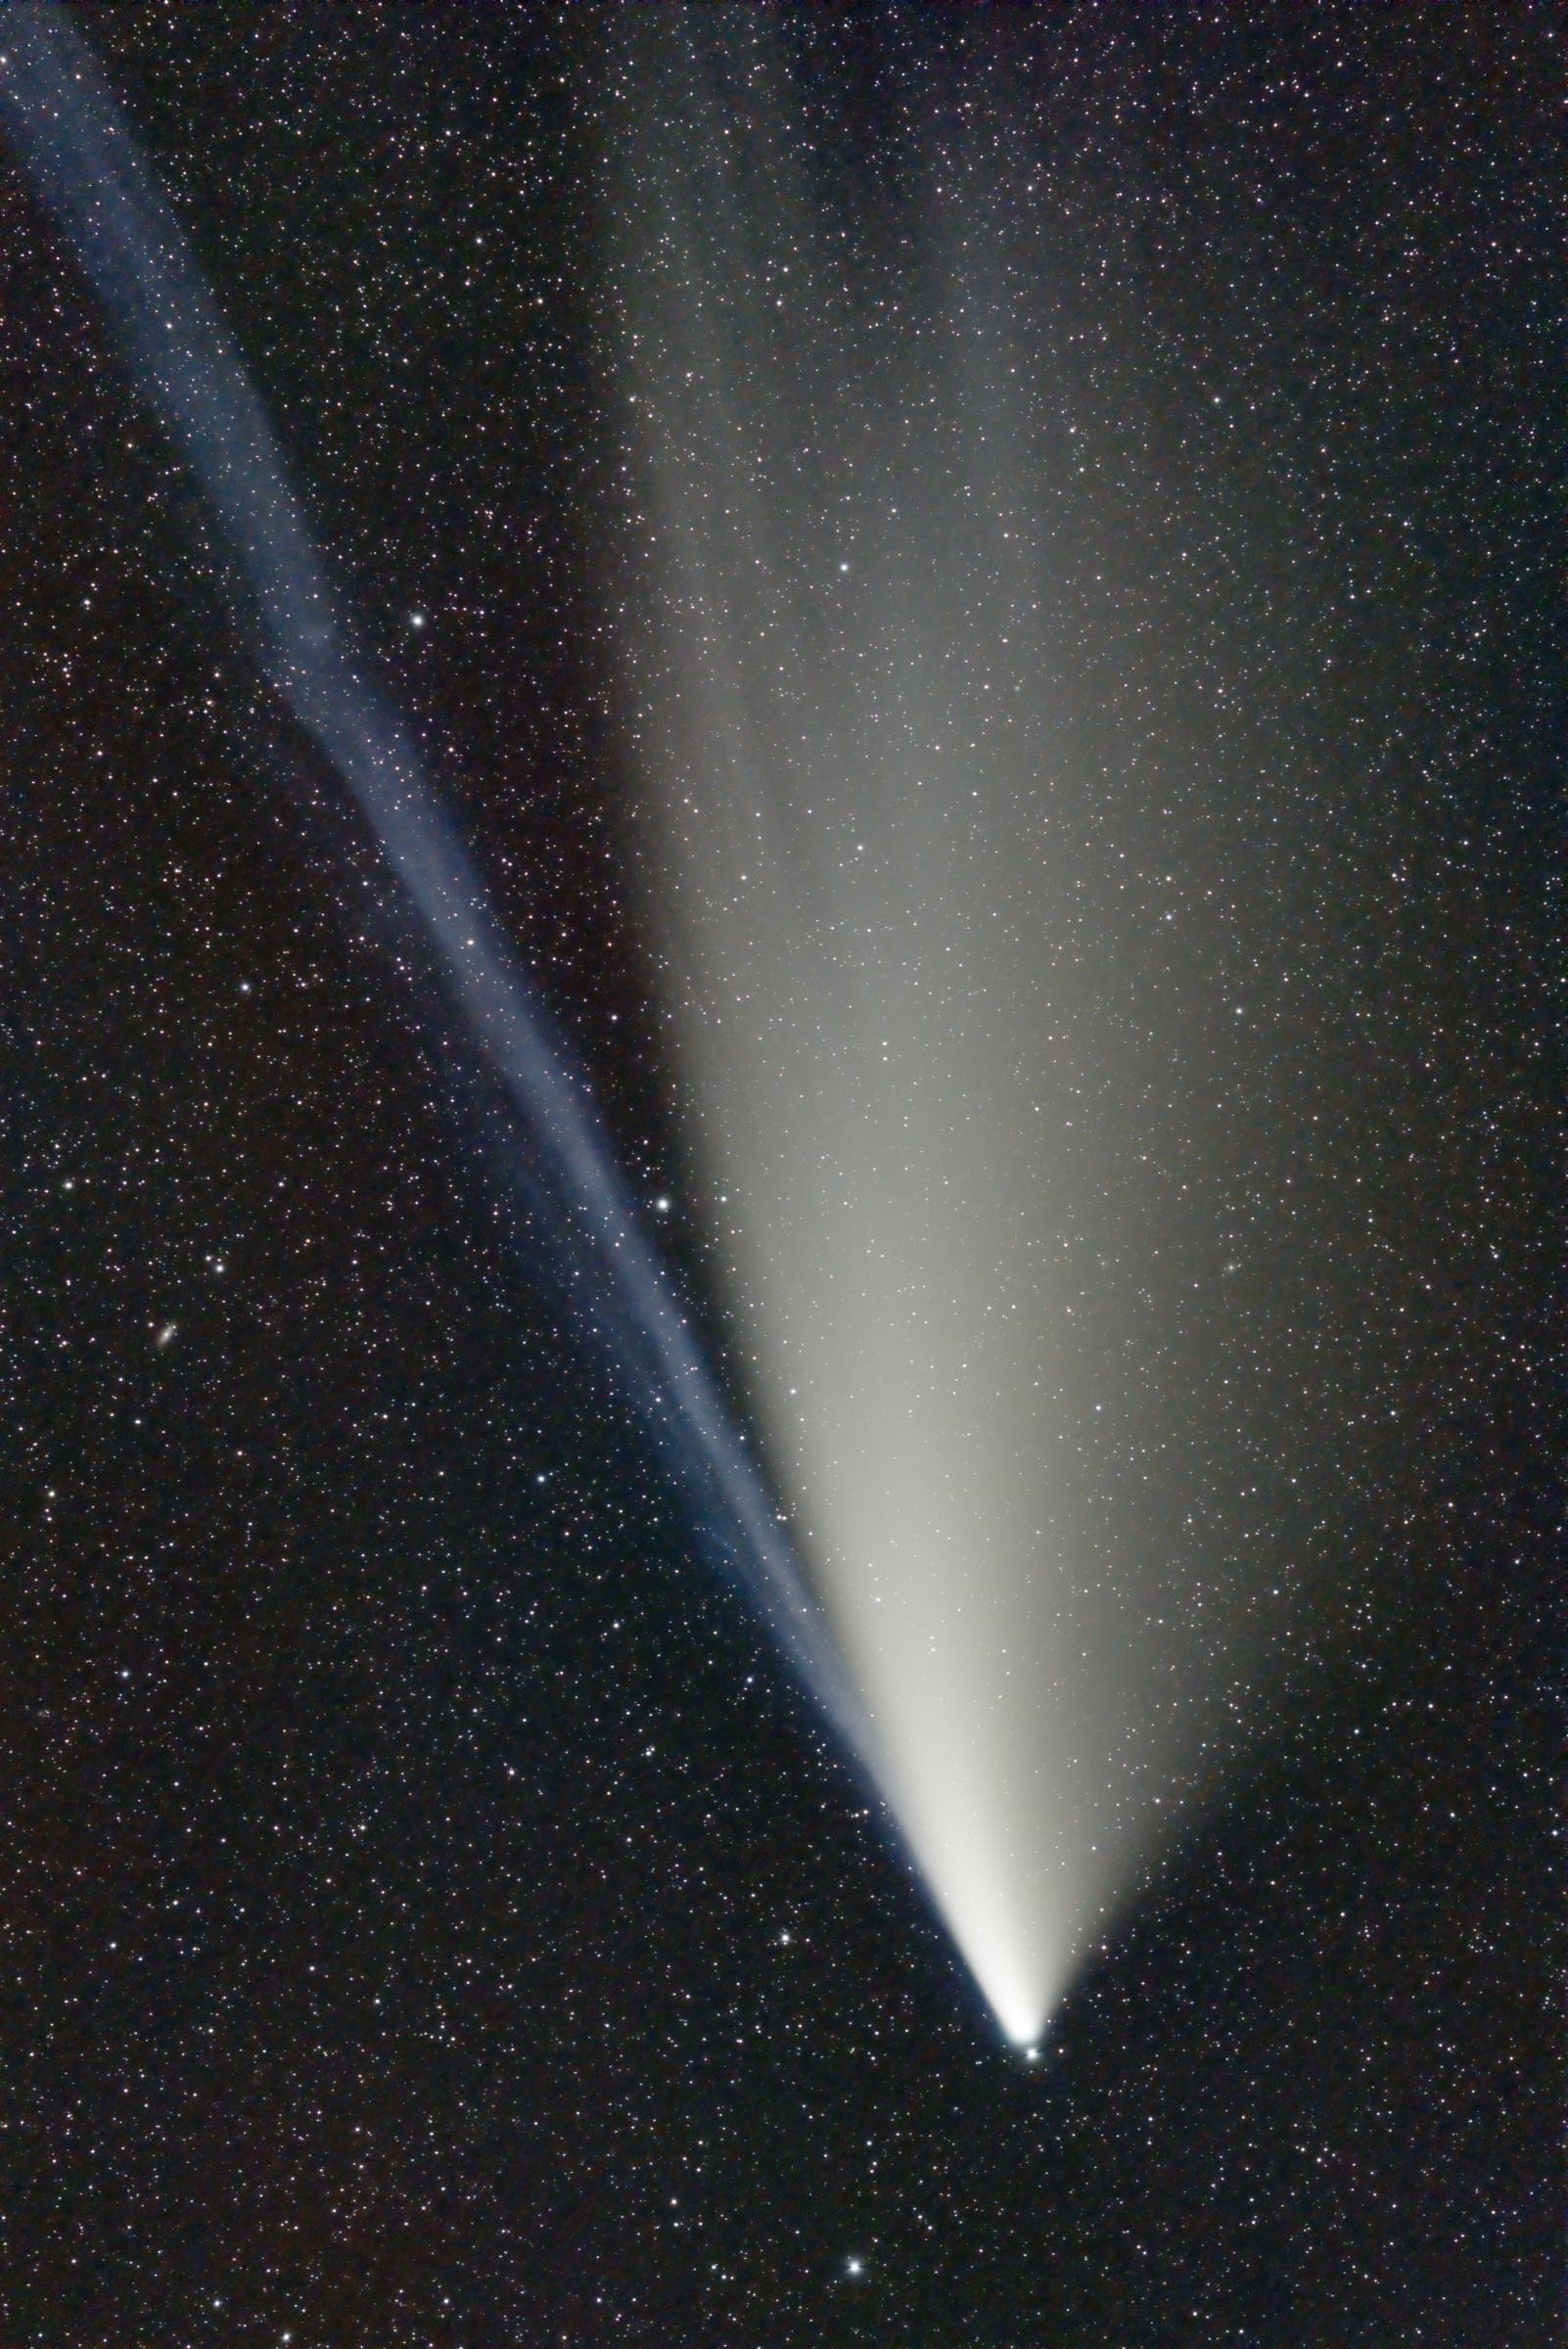 Comet NEOWISE at its best